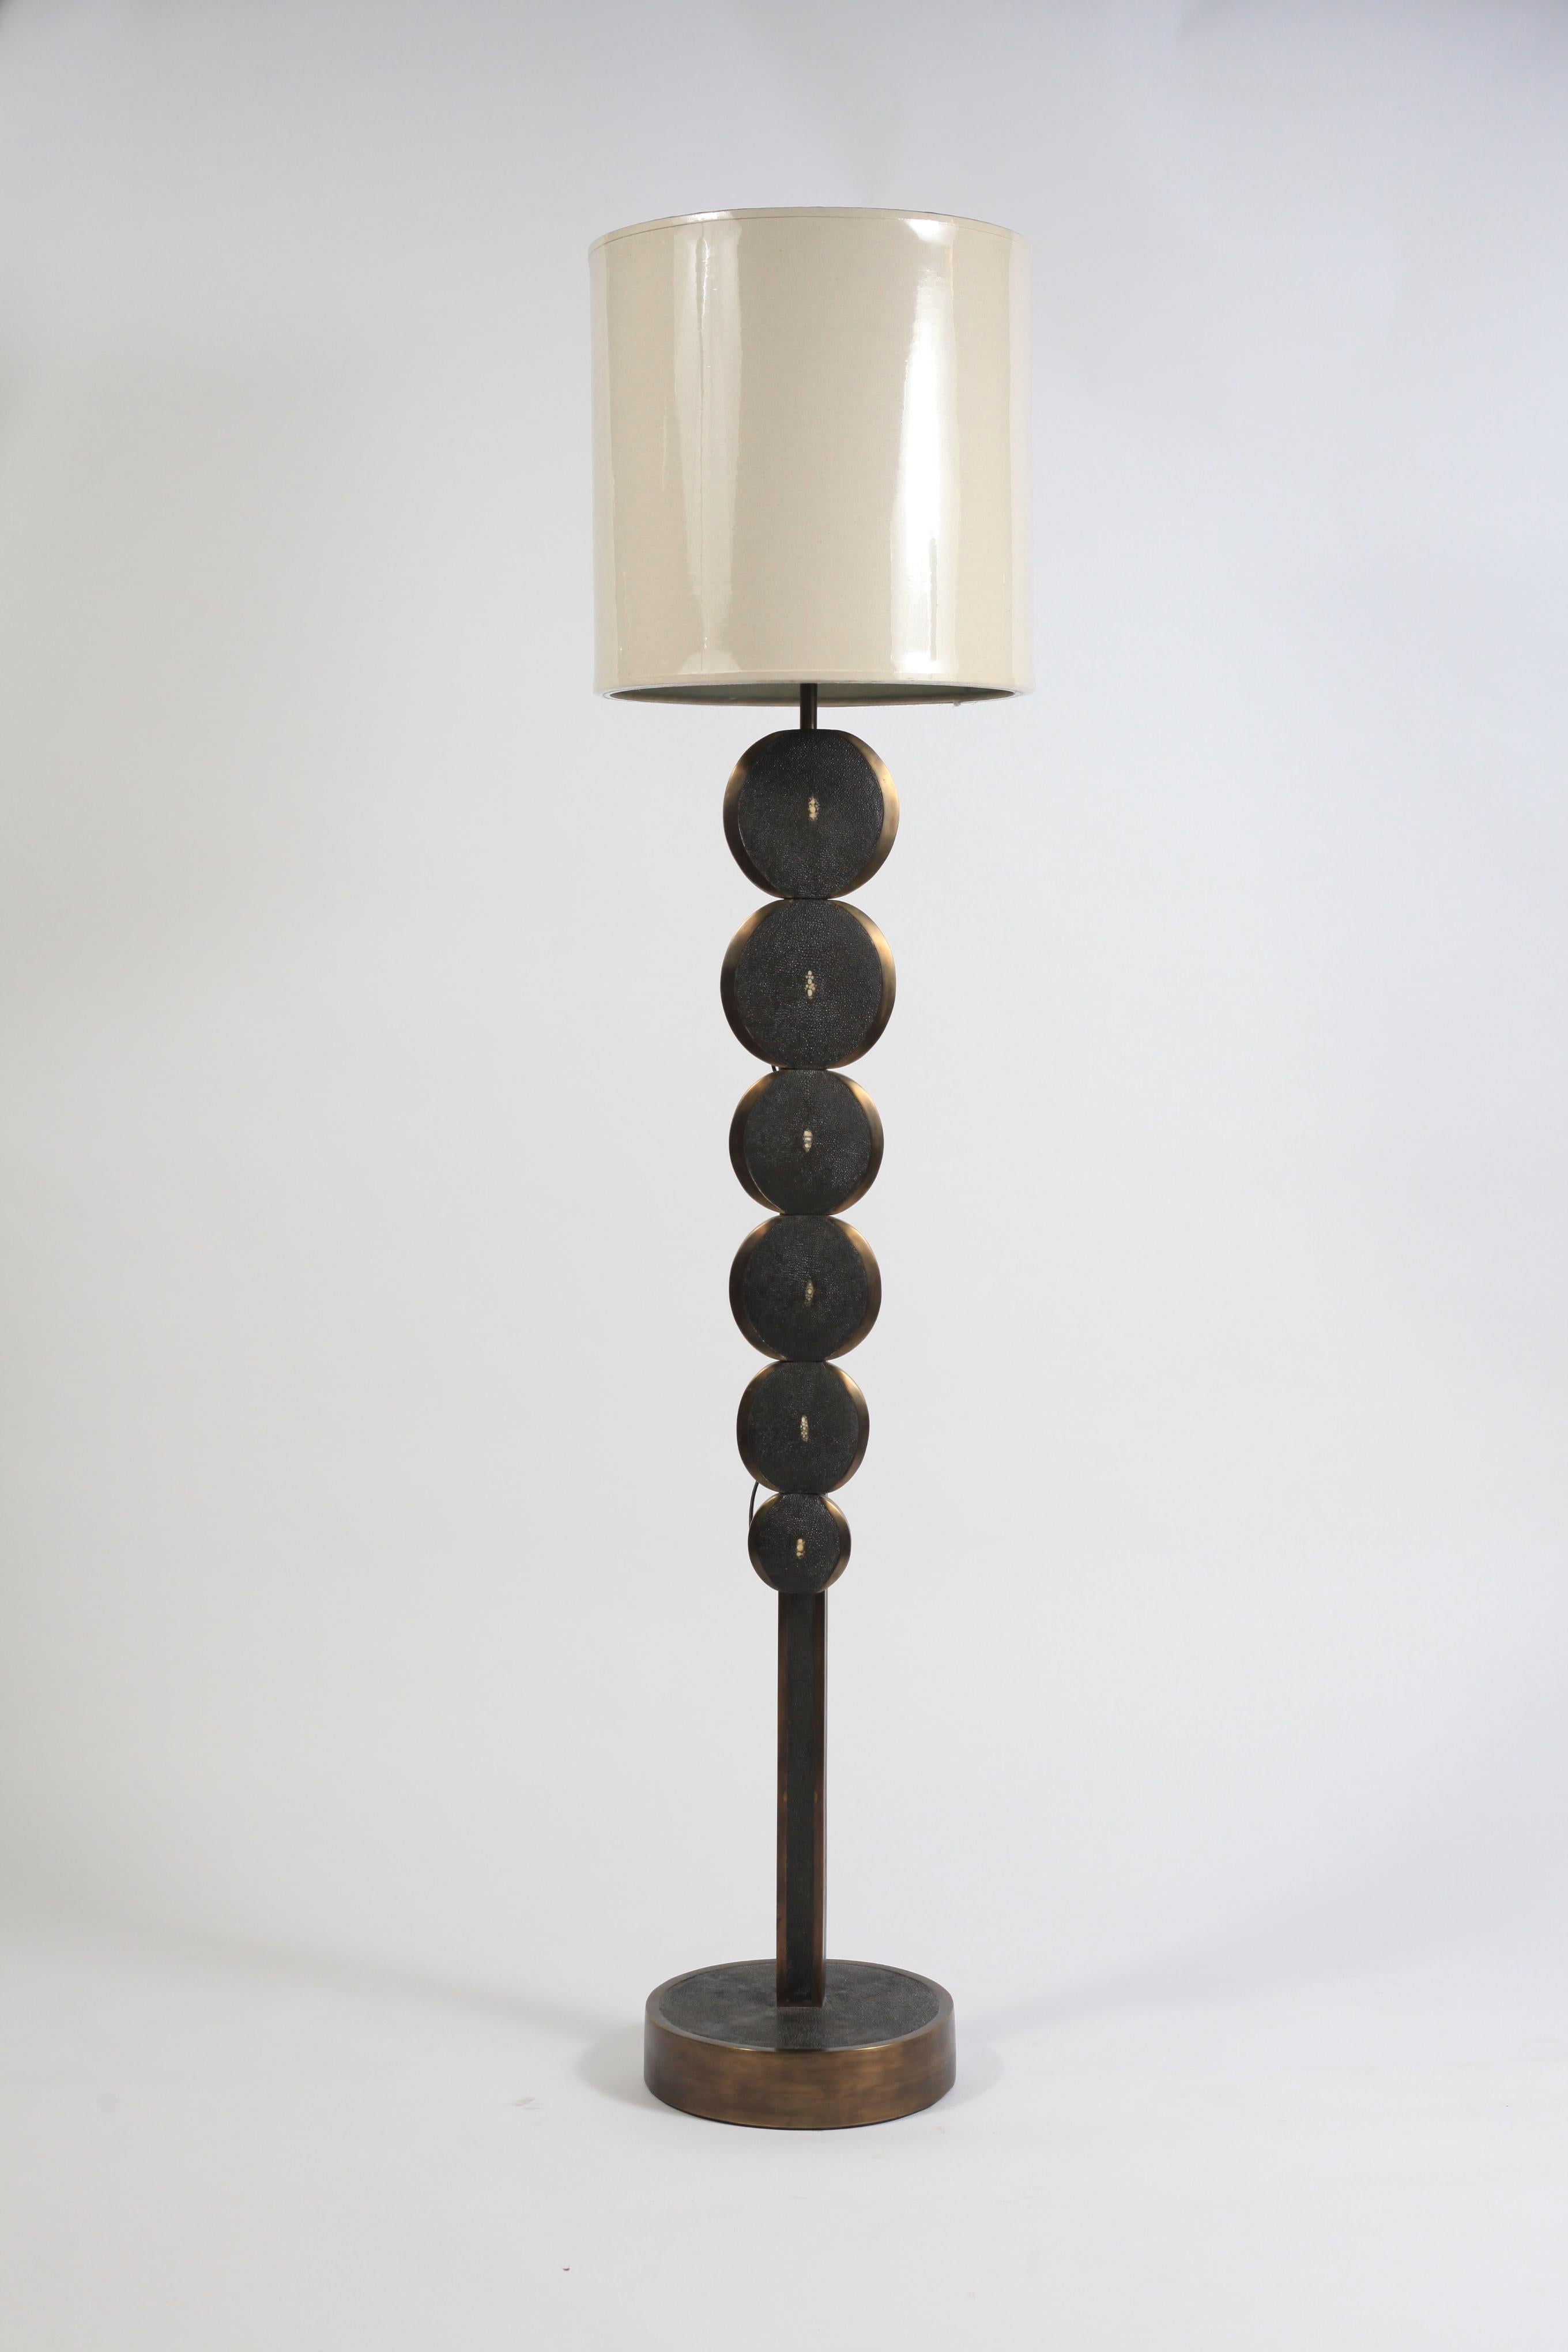 This adjustable floor lamp in cream shagreen and bronze patina brass by R & Y Augousti is a sculptural piece with beautiful inlay detailing. This floor lamp features circle parts that gradually increase and are inlaid with a bronze-patina brass